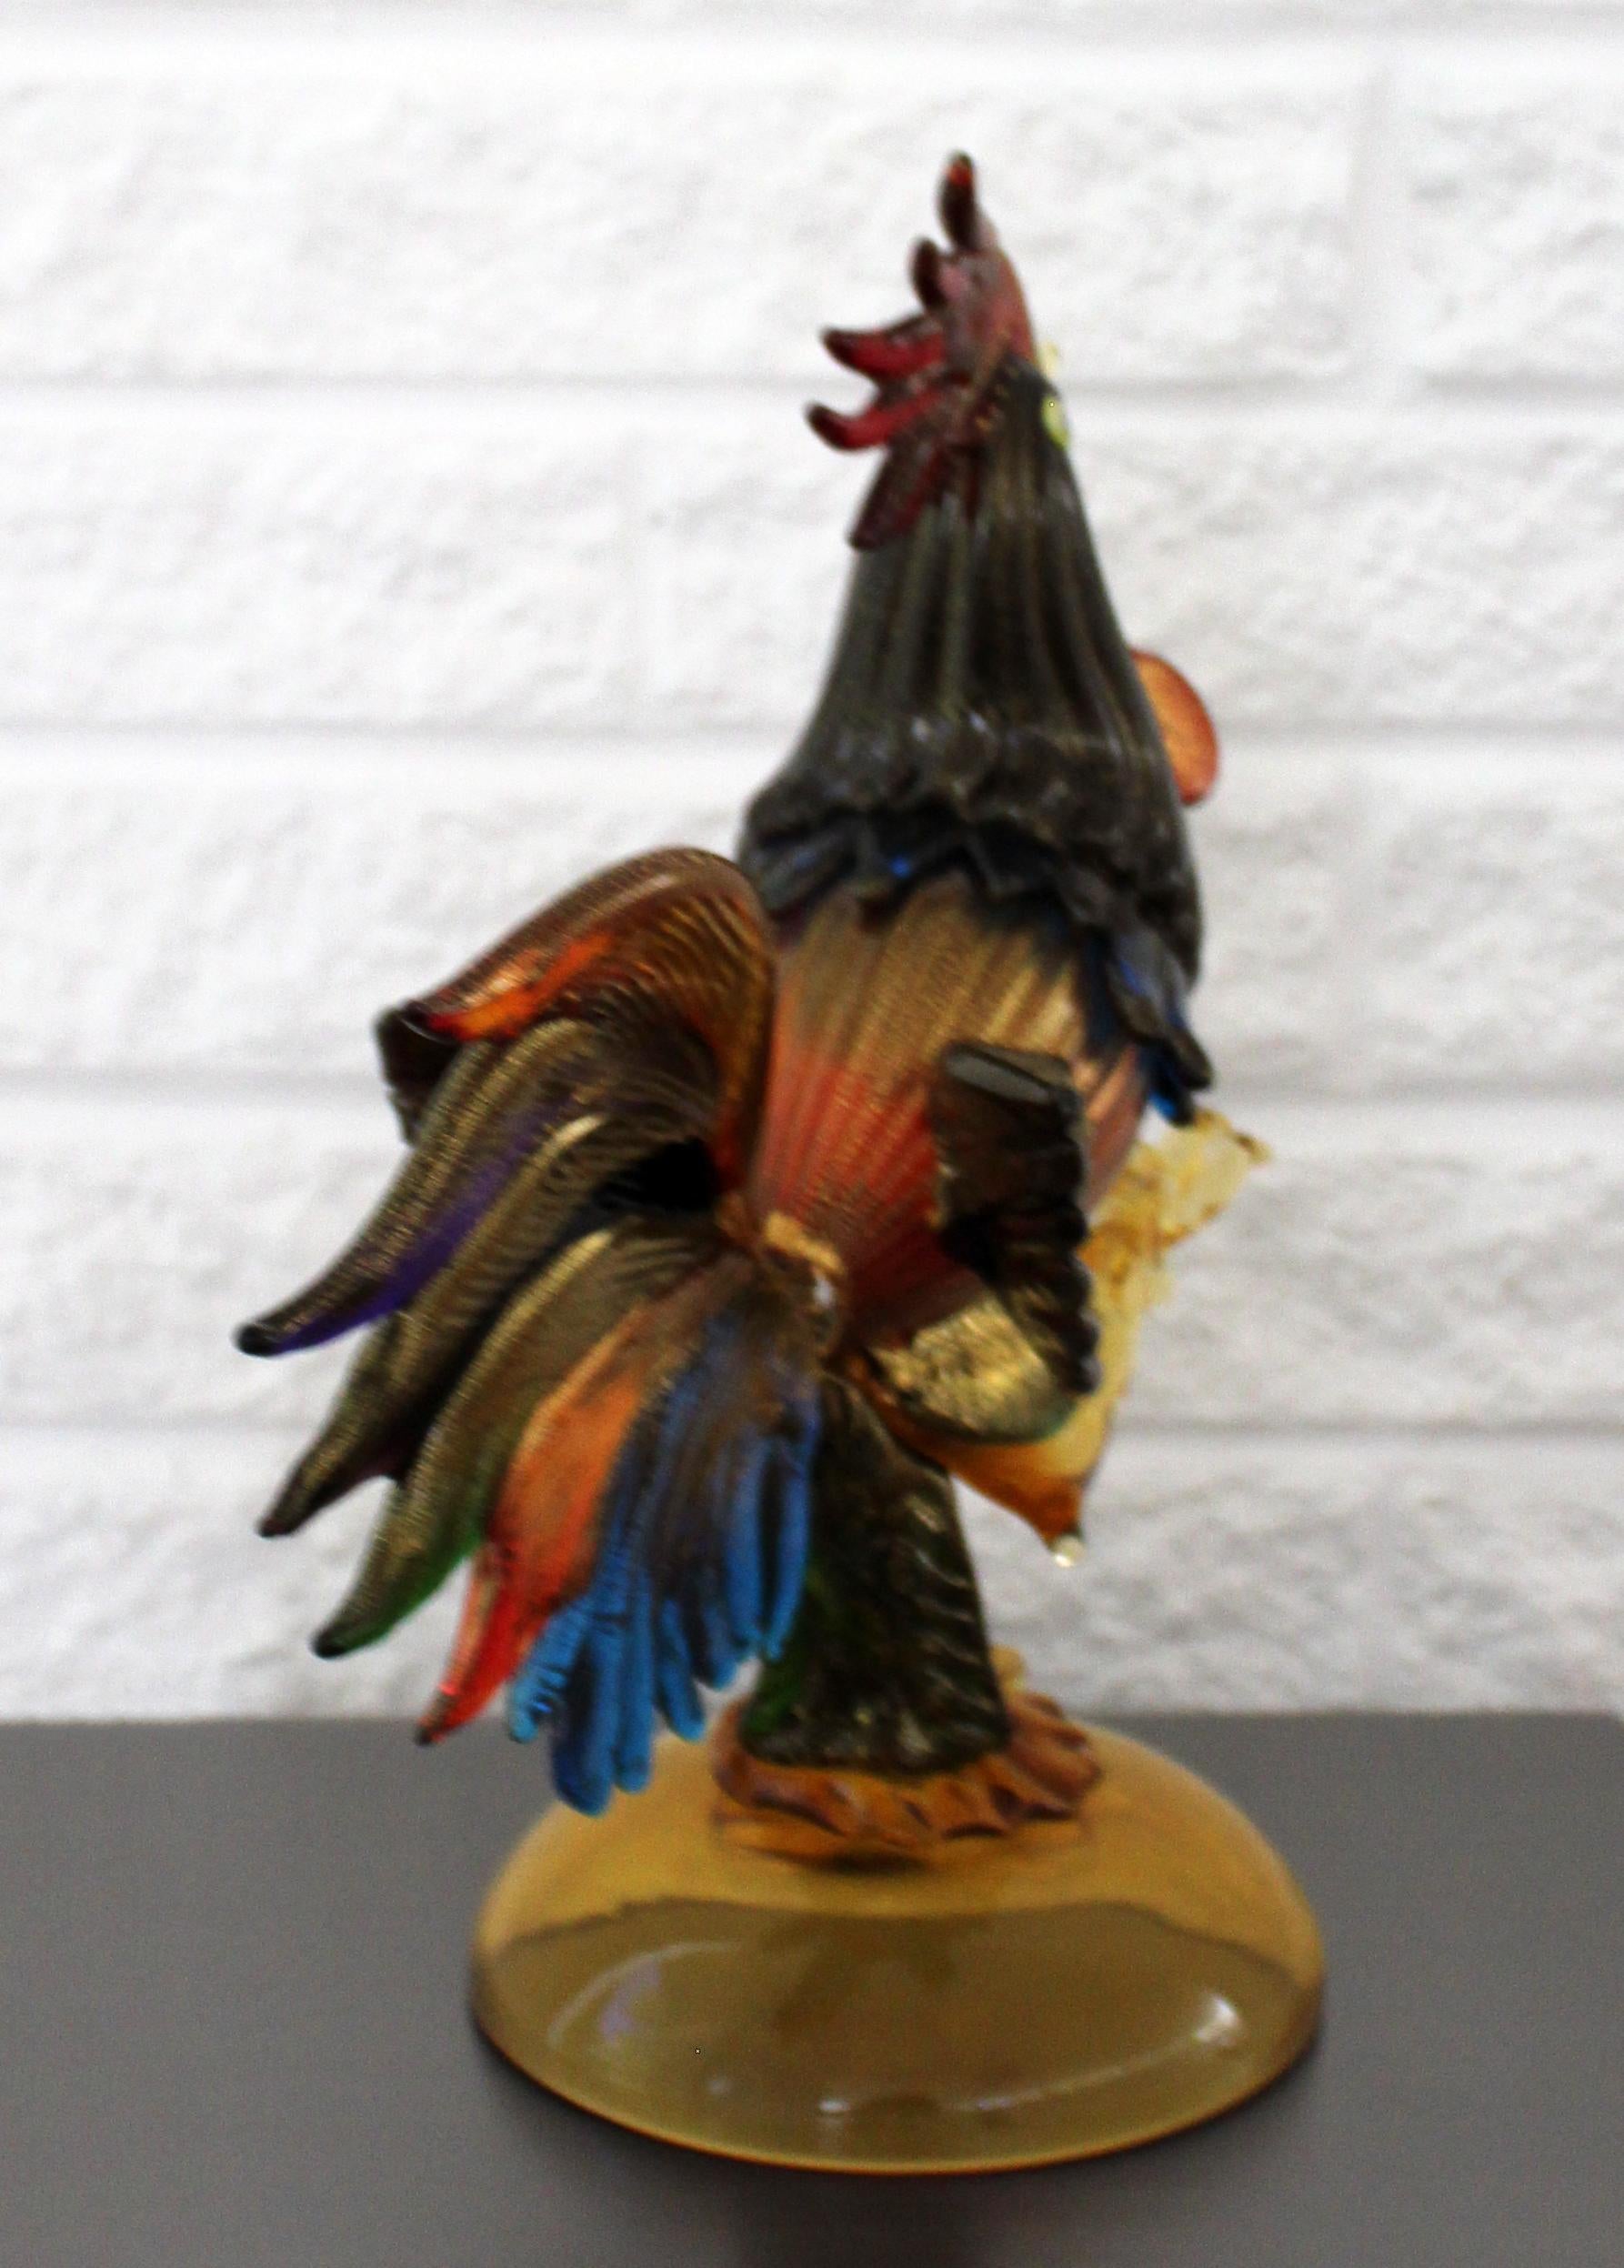 Murano Glass Mid-Century Modern Murano Italy Glass Rooster Table Sculpture, 1950s